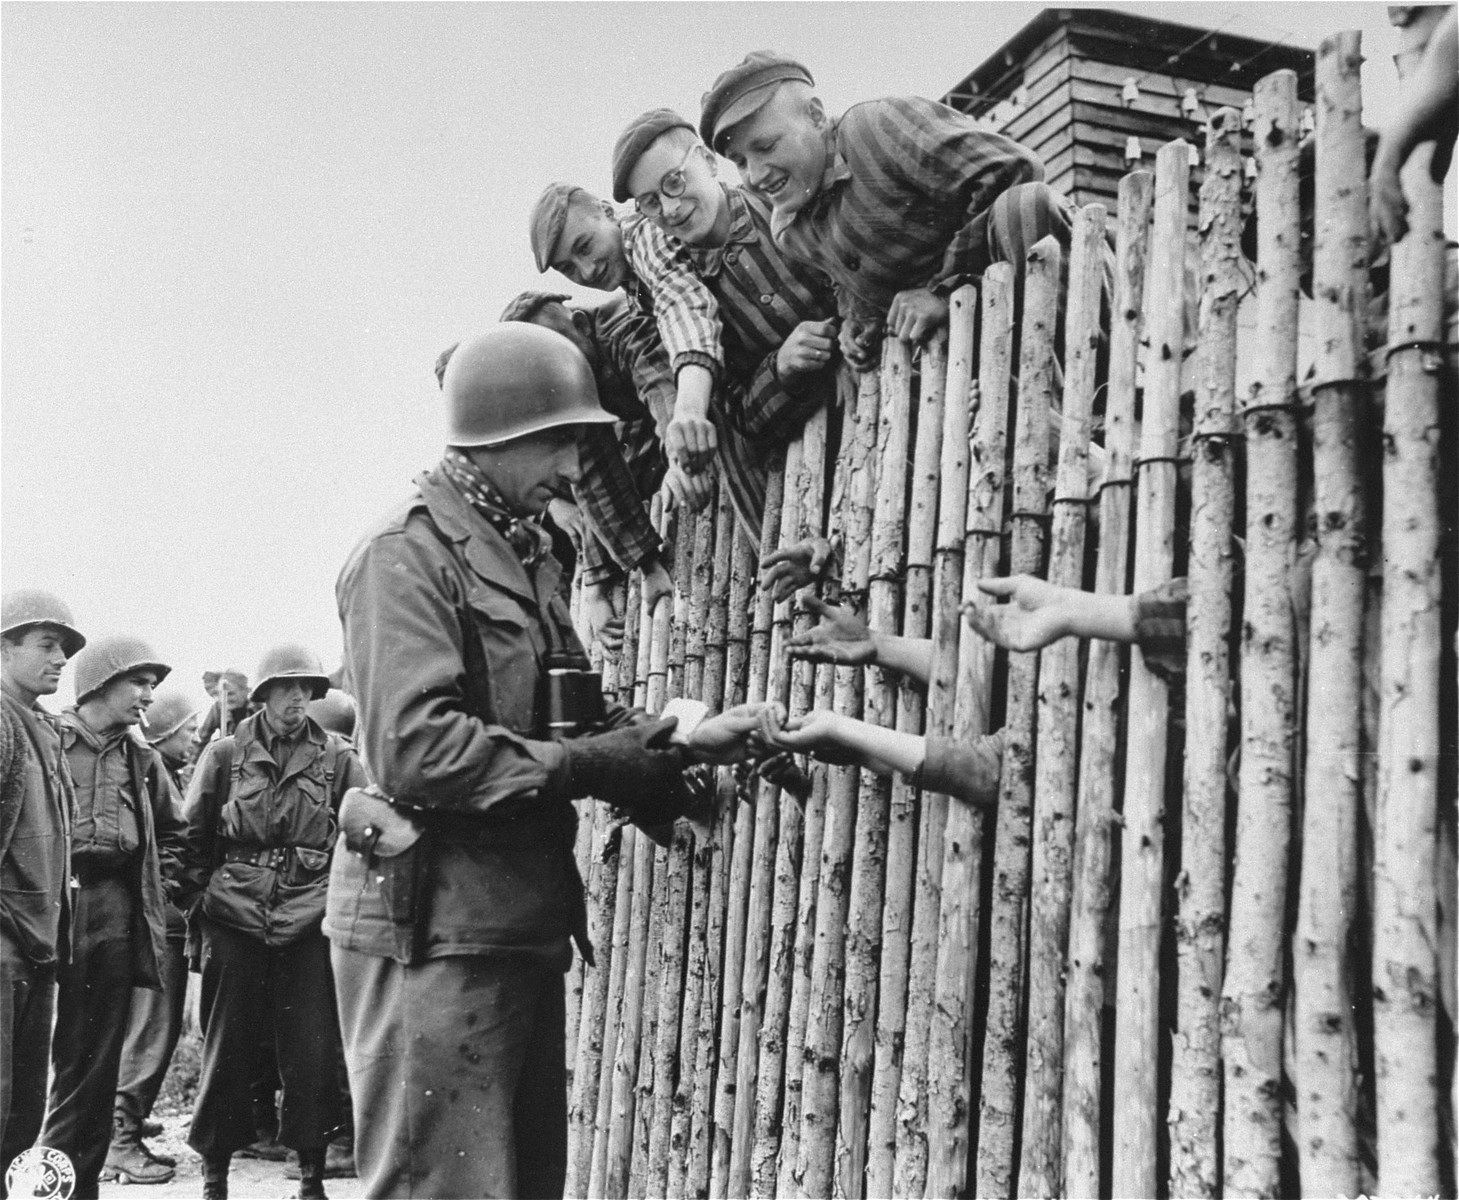 U.S. Army Corporal Larry Matinsk puts cigarettes into the extended hands of newly liberated prisoners behind a stockade in the Allach concentration camp.

Cpl Larry Mutinsk served in  Company A, 1st Battalion, 157th Infantry Regiment, 45th Infantry Divison.  Also pictured are U.S. Army soldiers Arthur Toratti and George Babel (second and third from the left).

Original caption reads, "Cpl Larry Mutinsk, Philadelphia, PA., hands out his last pack of cigarettes to the eager reaching hands of the prisoners within the wire stockade of the prison camp at Dachau."